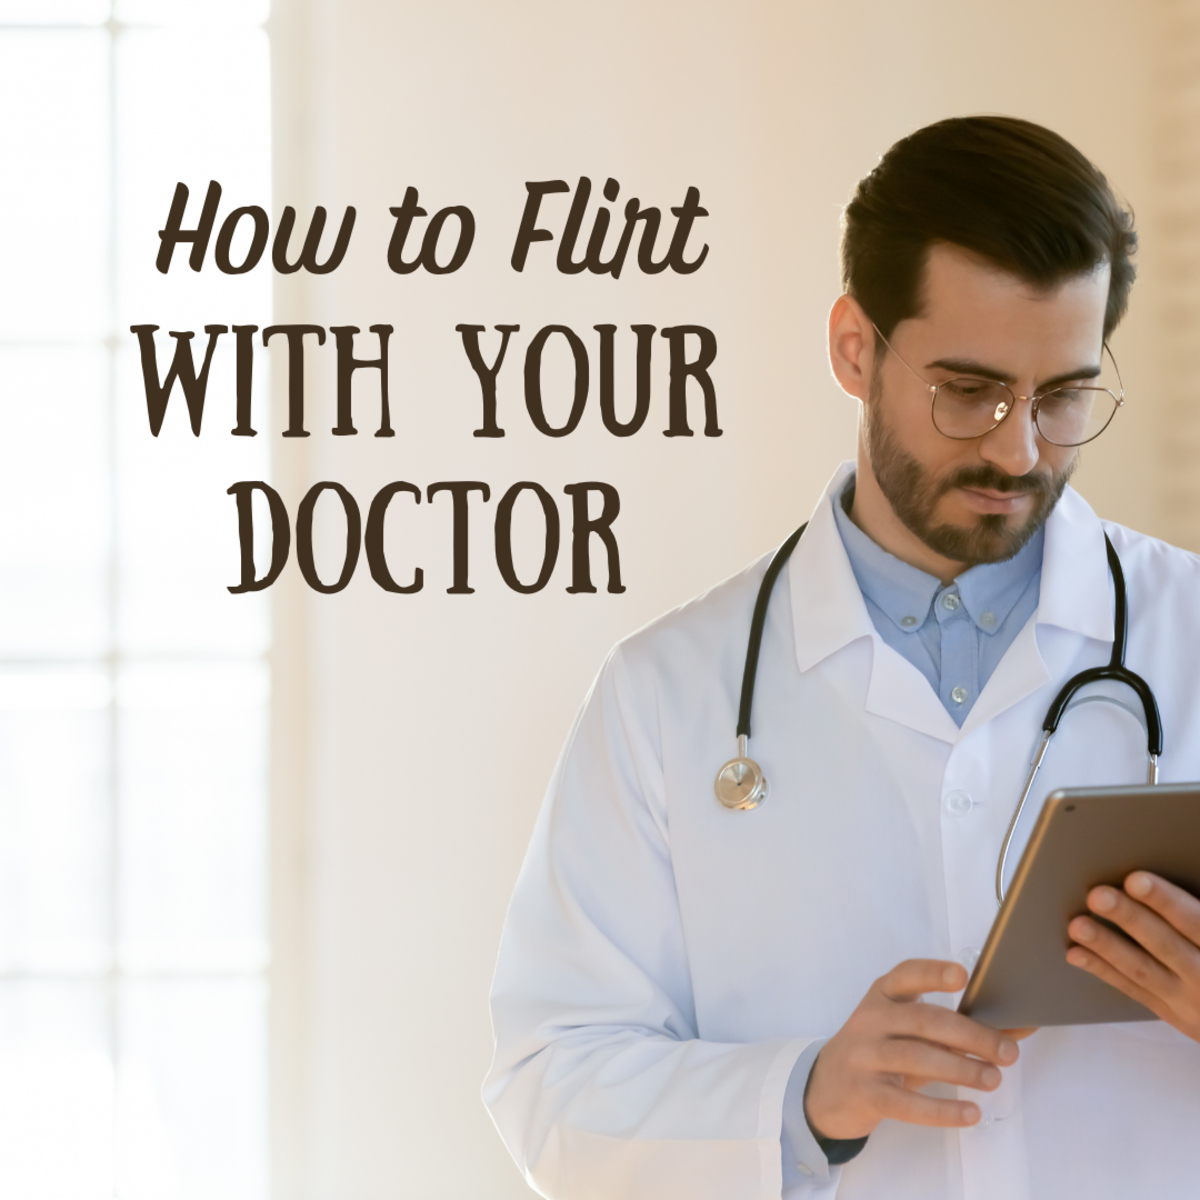 10 Subtle Ways to Hit on Your Doctor